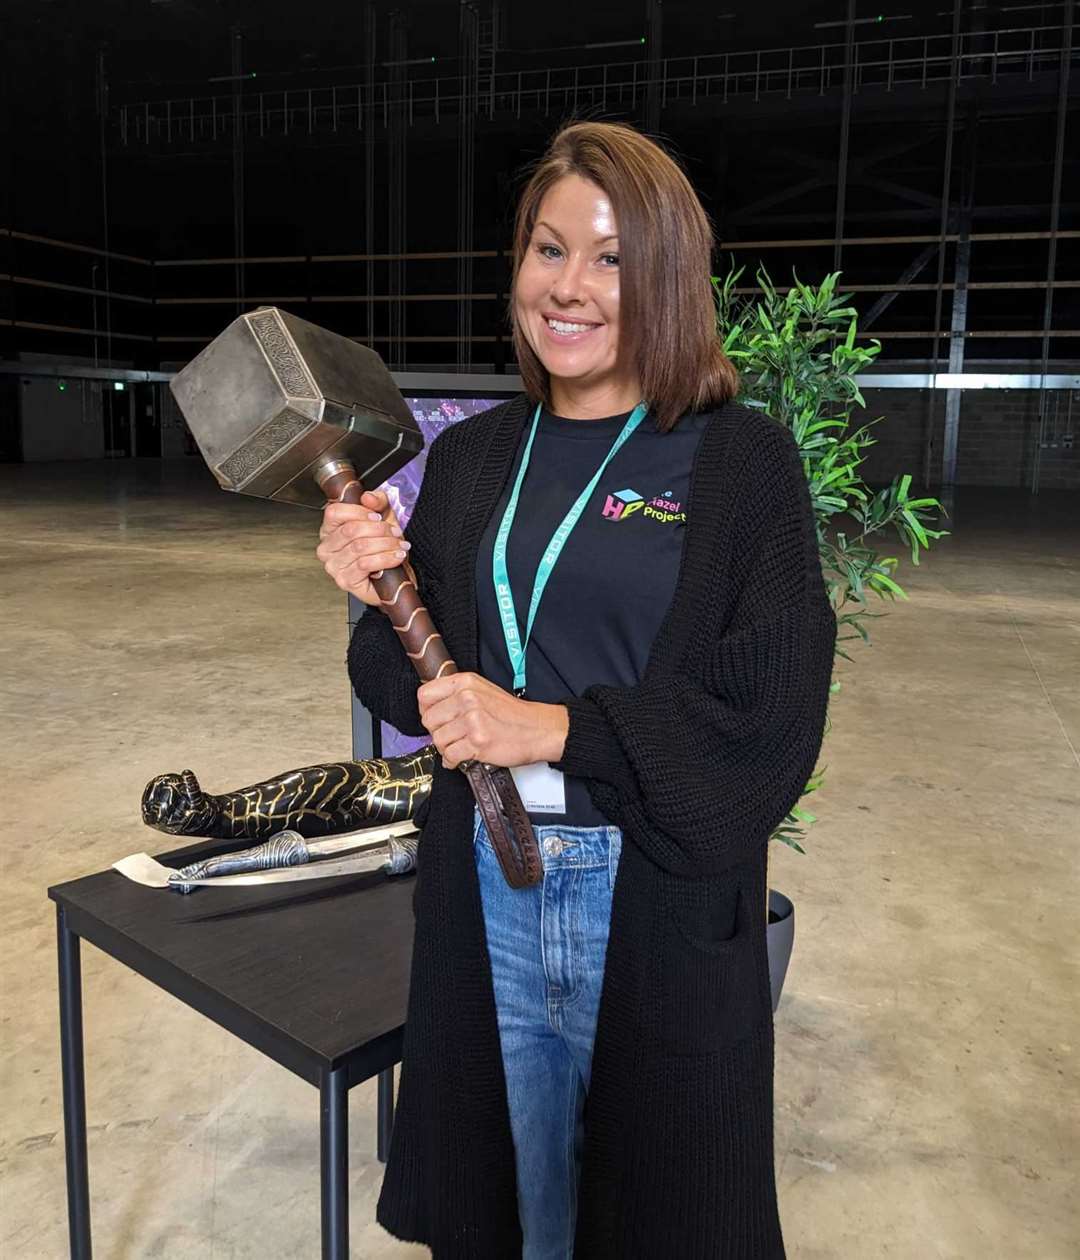 Hazel Project foster parent Donna was able to hold the hammer from the Thor movie. Picture: Hazel Project